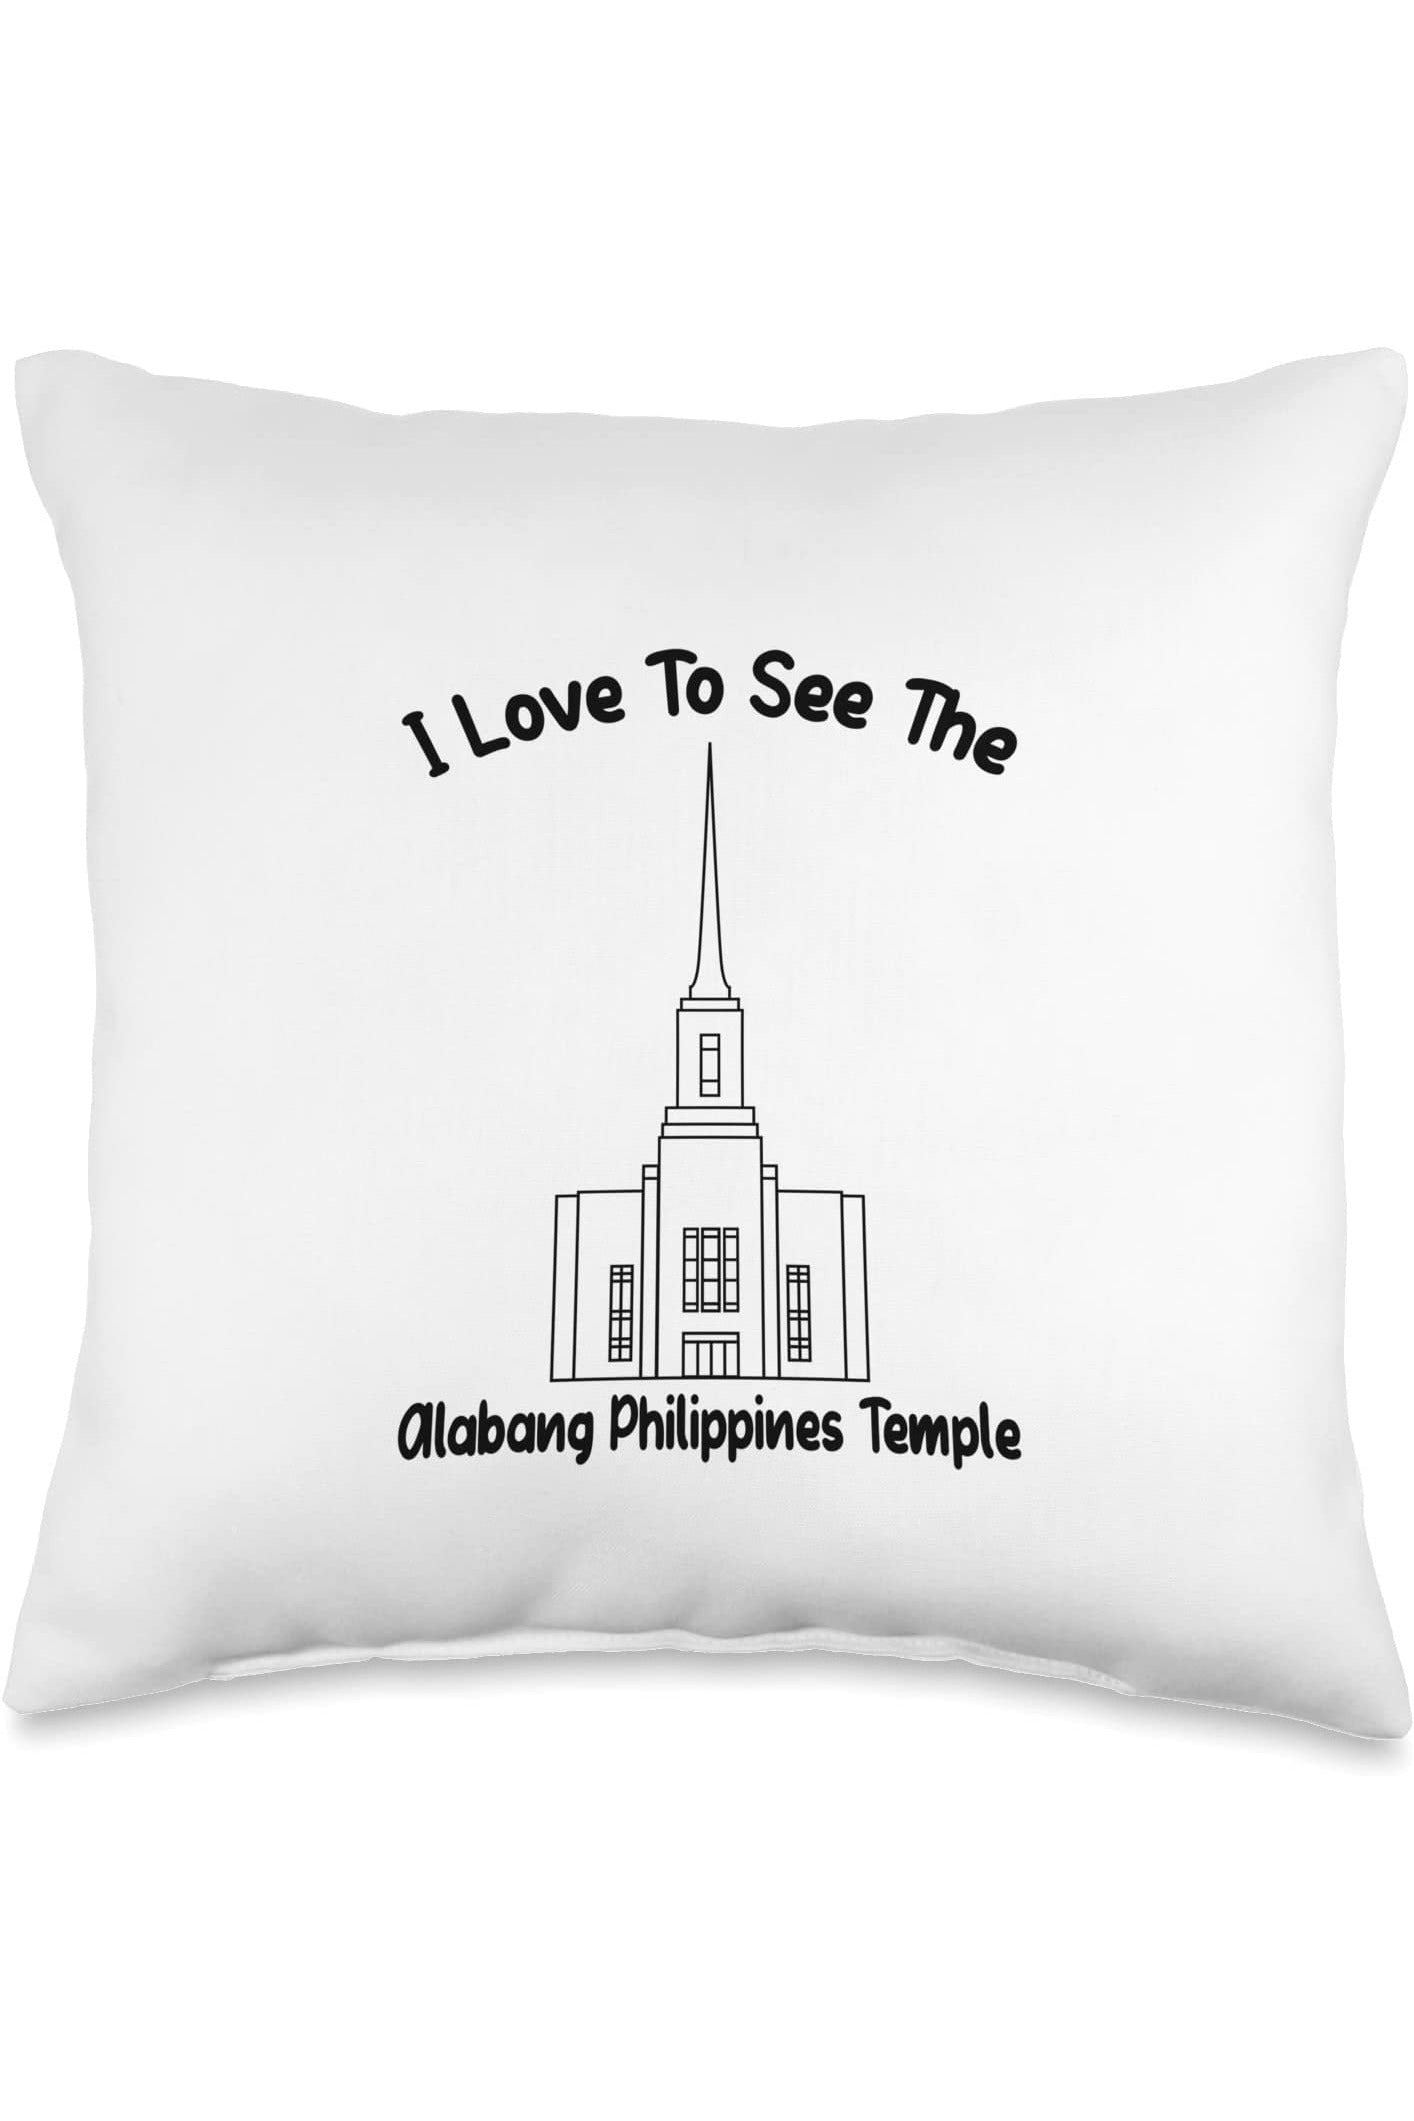 Alabang Philippines Temple Throw Pillows - Primary Style (English) US